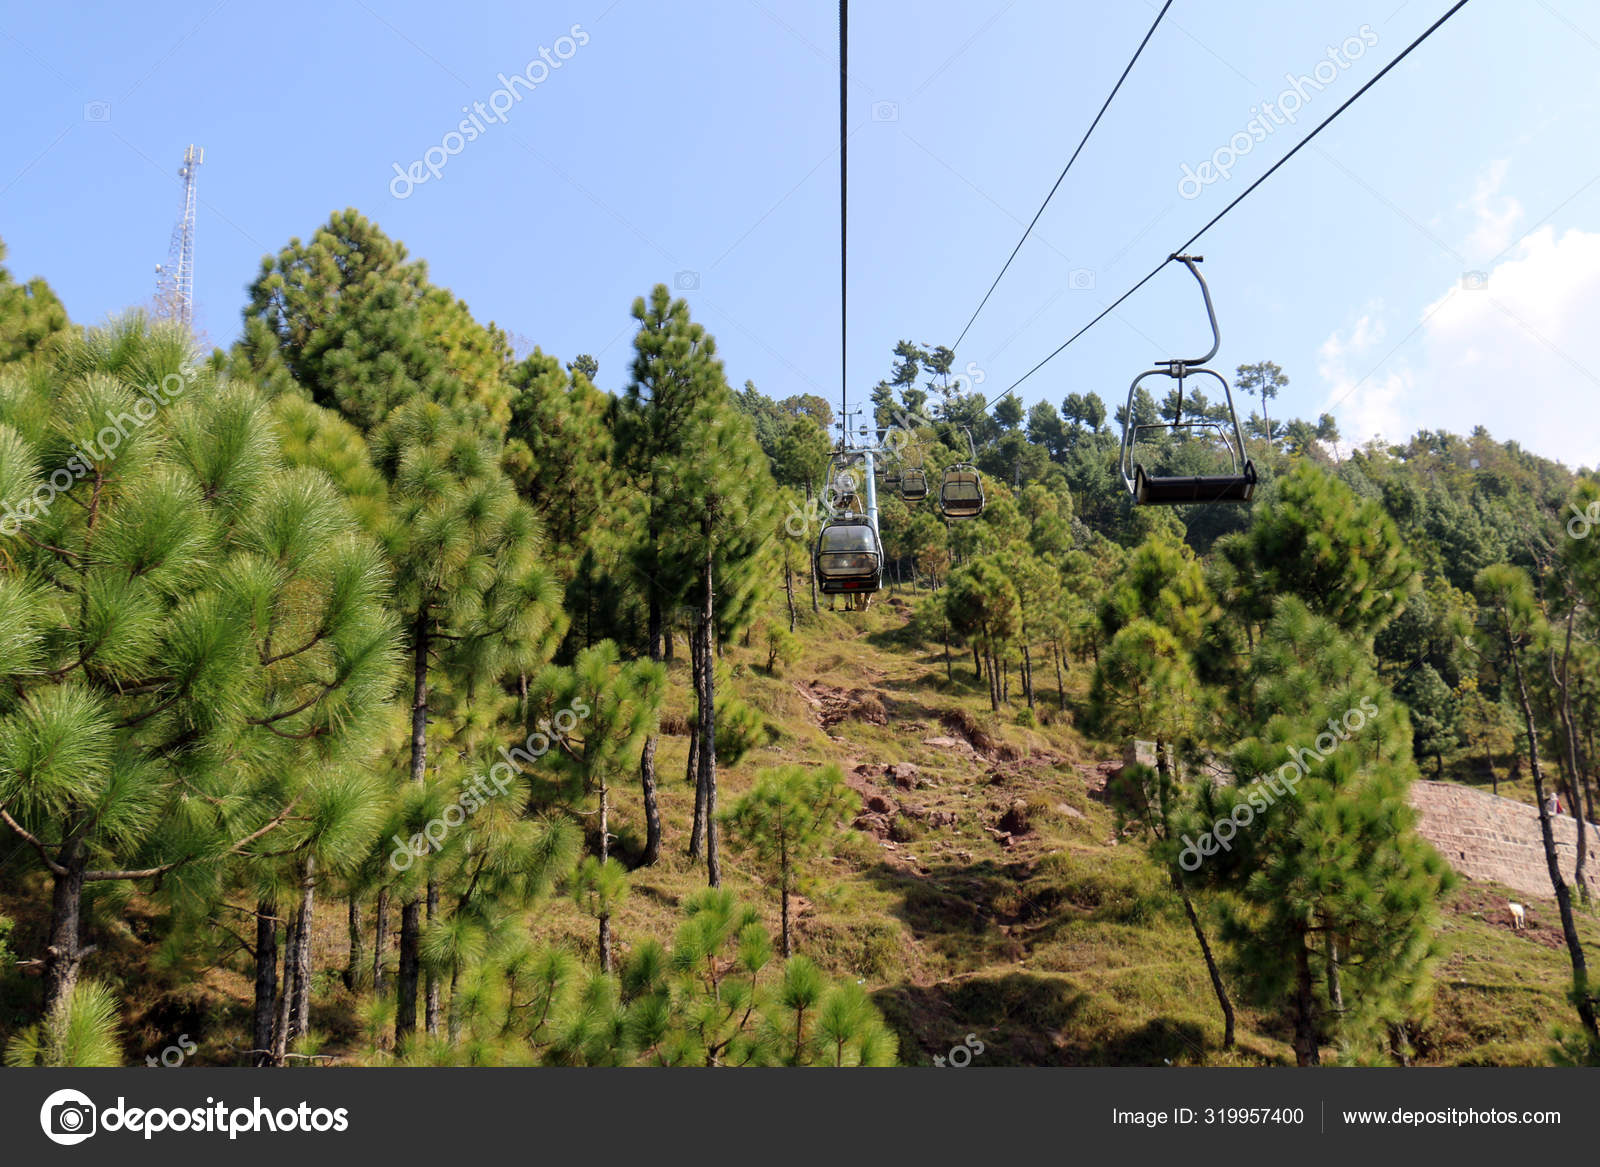 Lush Green Pine Trees Forest Landscape Patriata Chairlift New